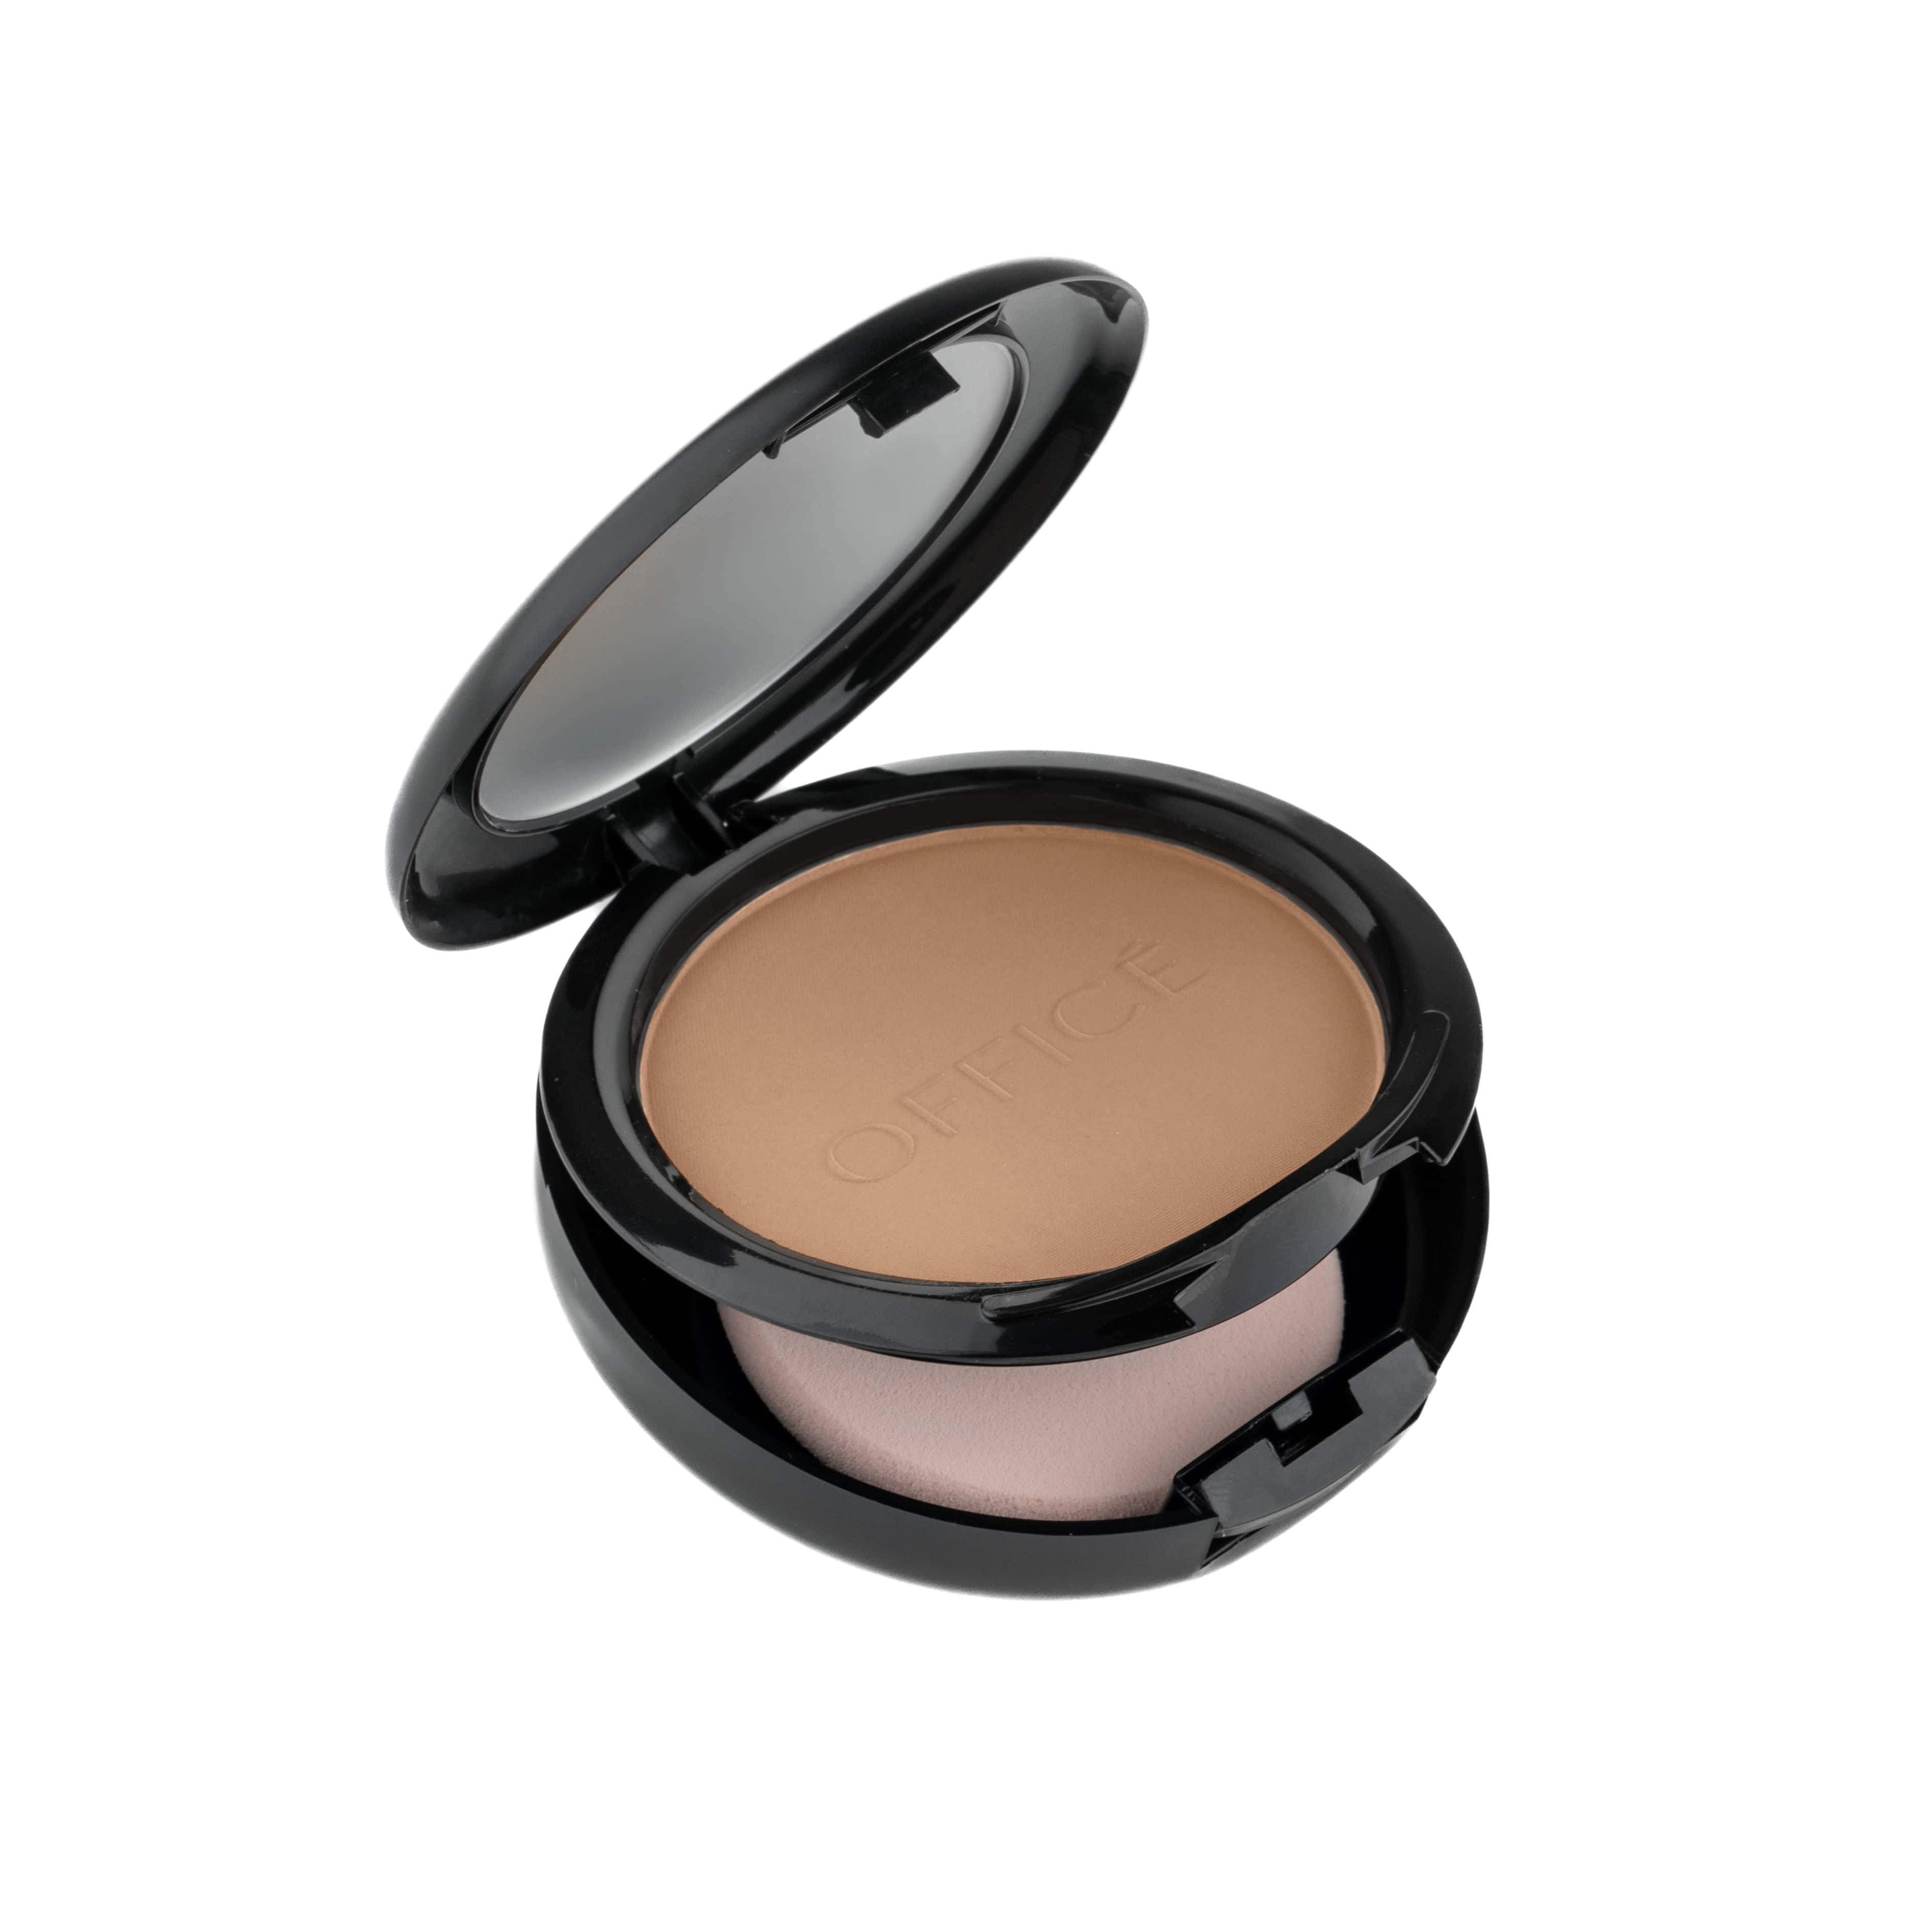 Long-wearing compact powder ,Water-resistant makeup, Dual usage powder cake, Full coverage powder, Matte finish powder, Natural look makeup, Buildable coverage, Skin-perfecting powder, Makeup for girls, Beauty essential compact, Everyday wear makeup, Teenage makeup product, Women's makeup item, Office makeup powder, Professional makeup compact